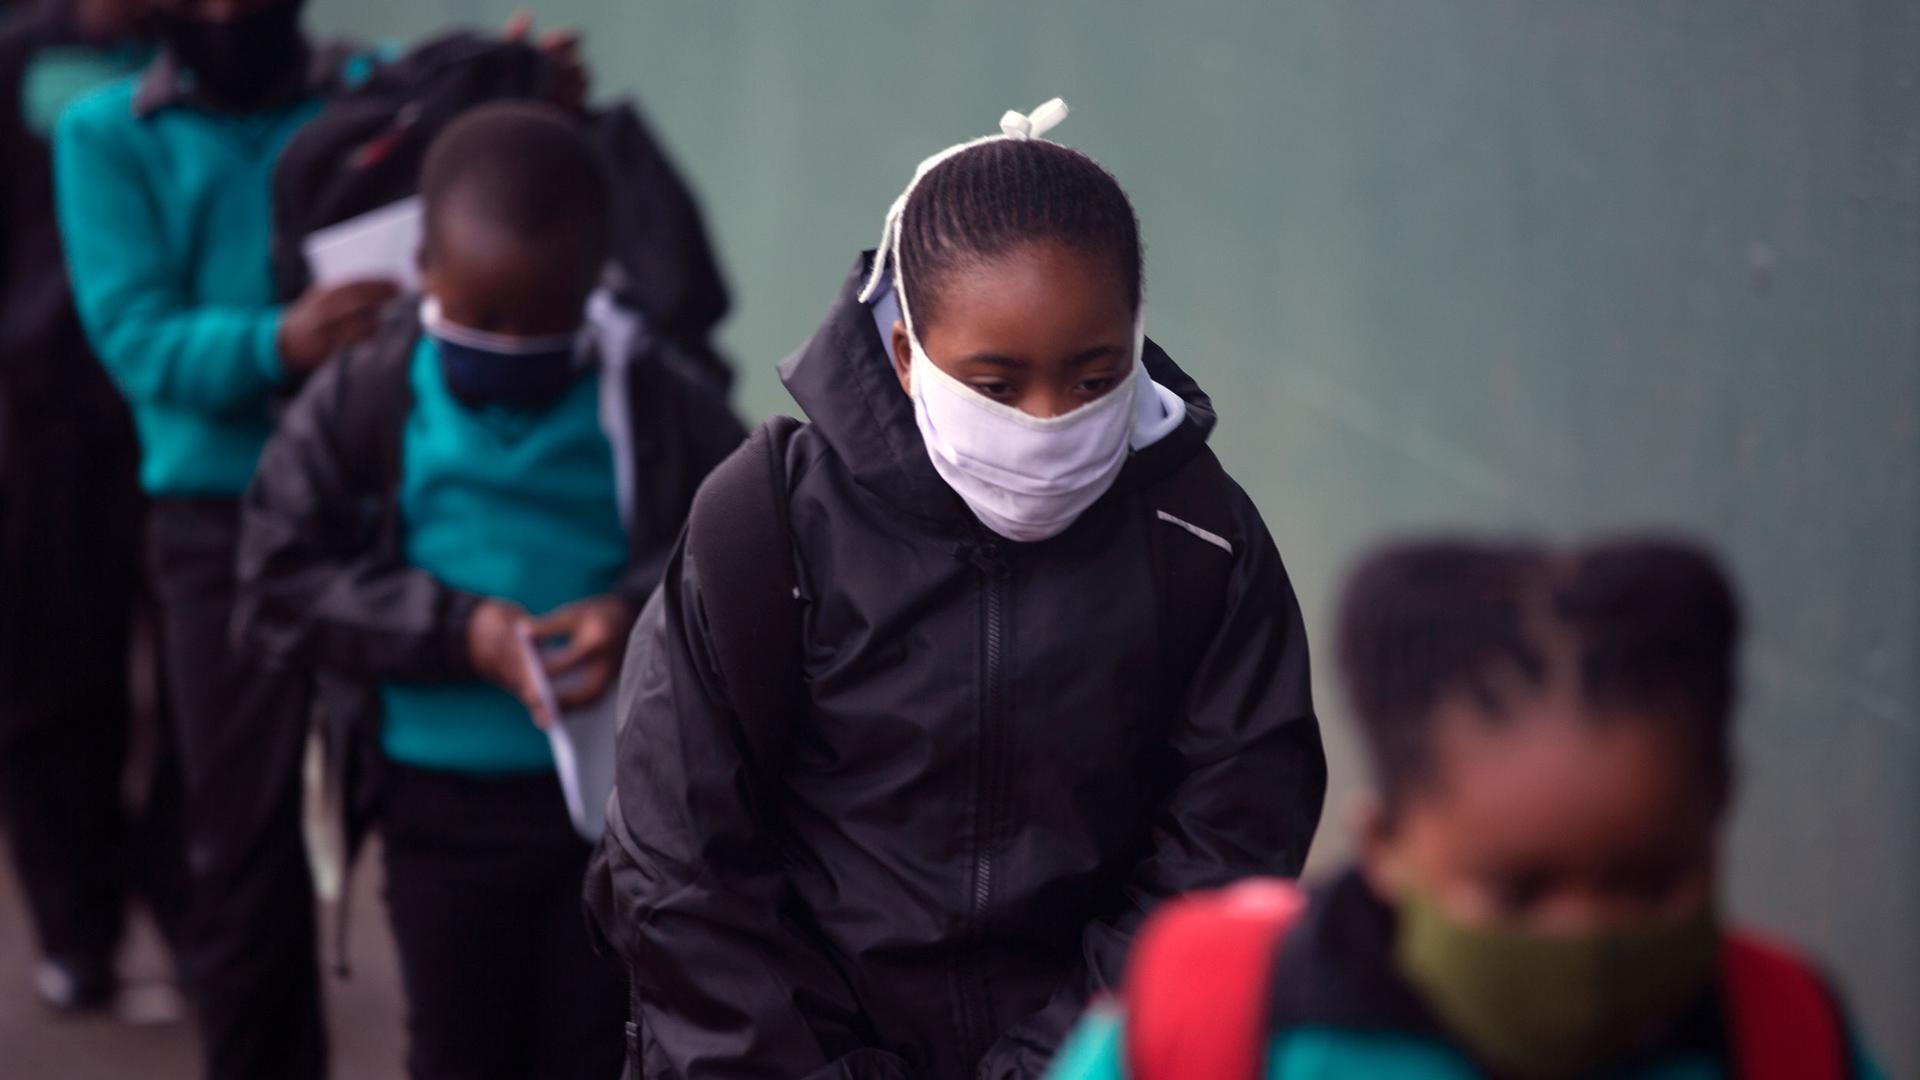 A line of young school children are shown wearing face masks and wearing backpacks and jackets.